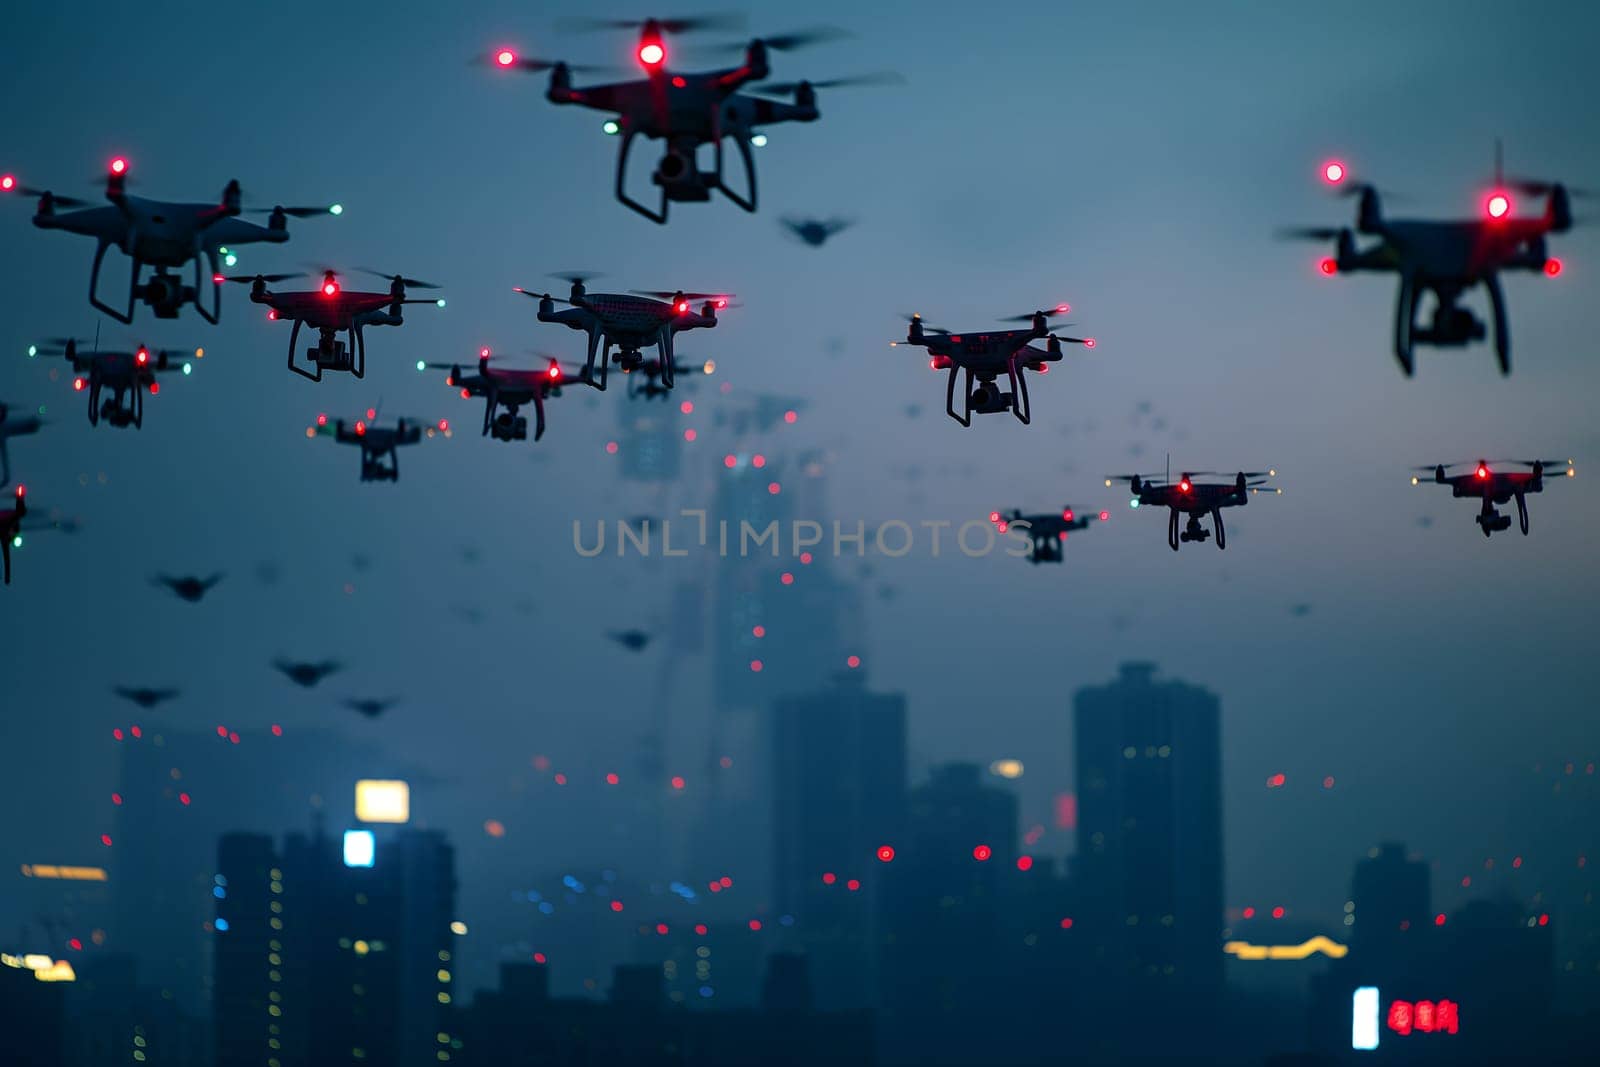 Group of drones over city at summer morning. Neural network generated image. Not based on any actual scene or pattern.